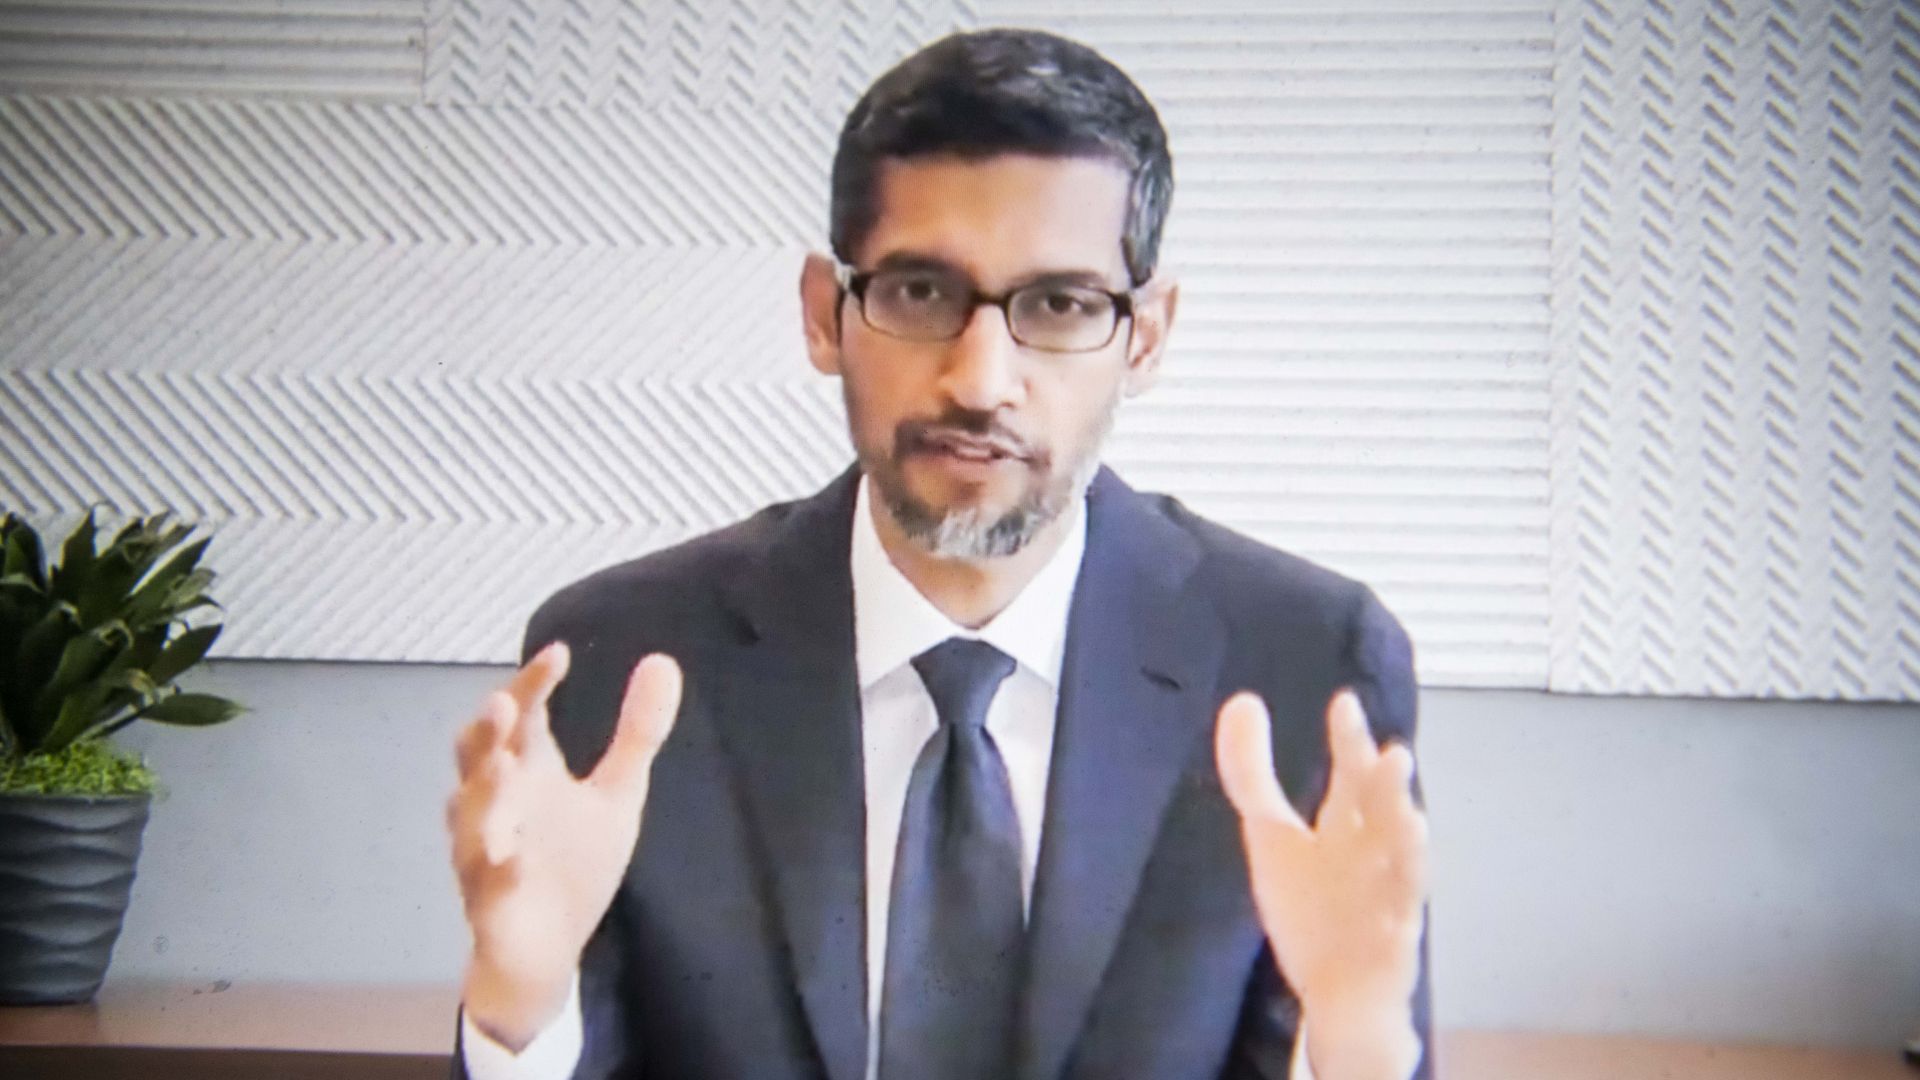 Photo of Google CEO Sundar Pichai in a suit at a desk speaking in a videoconference